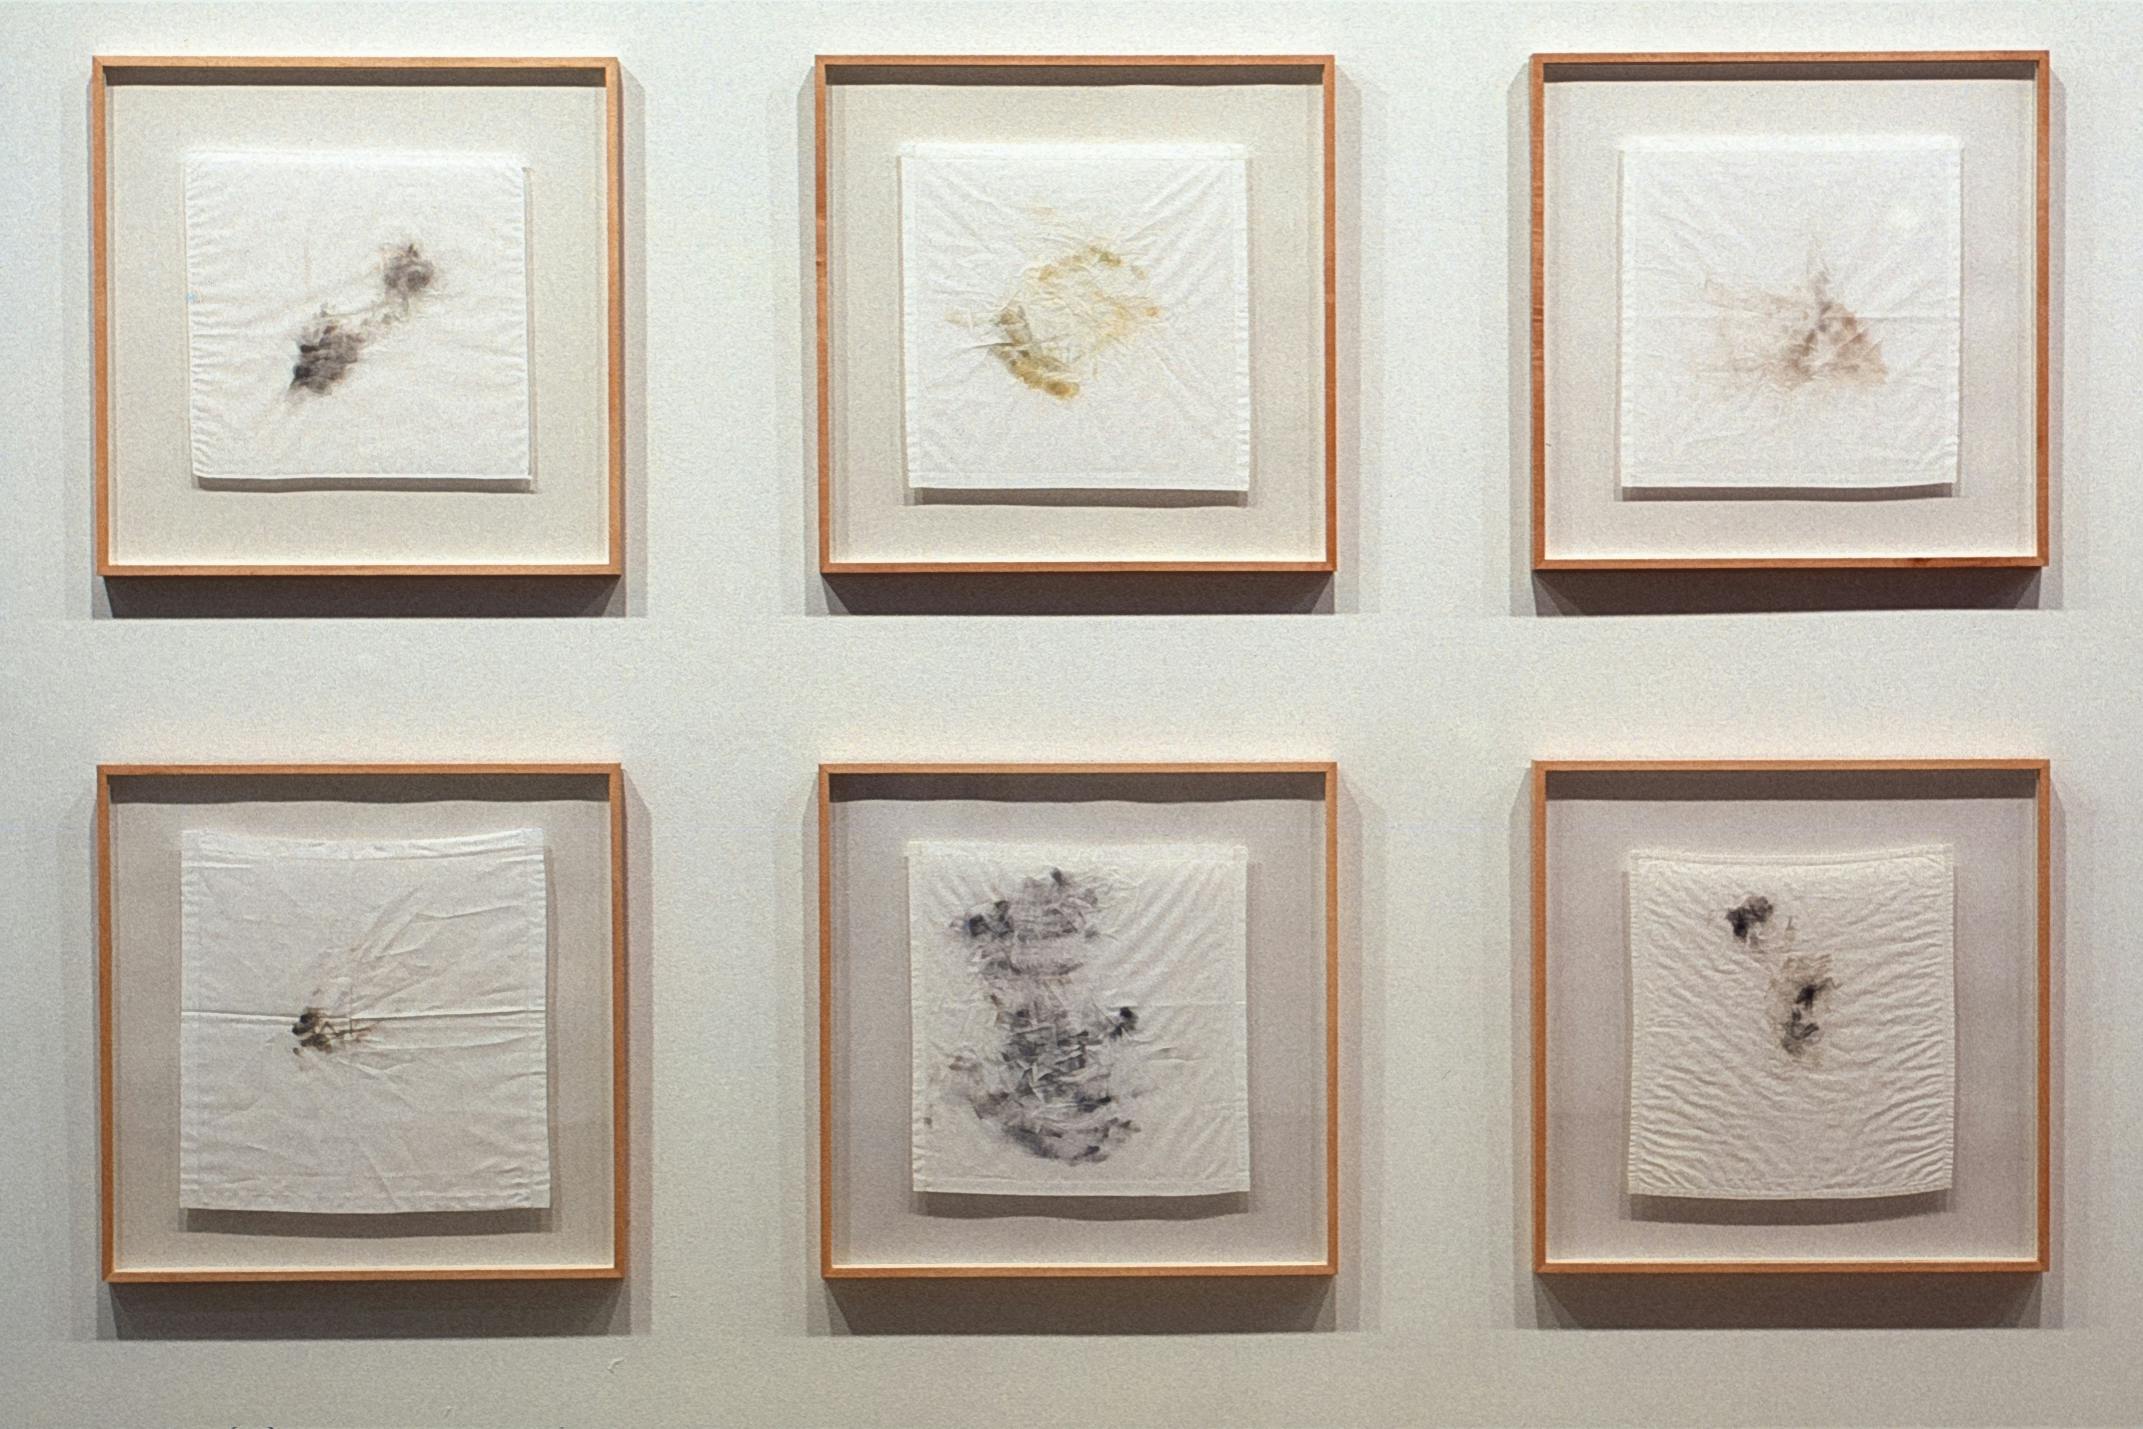 Detail of art installation by Cornelia Parker. Individually framed six white handkerchiefsare  mounted on a wall. Uniquely shaped black and brown stains are on these handkerchiefs.